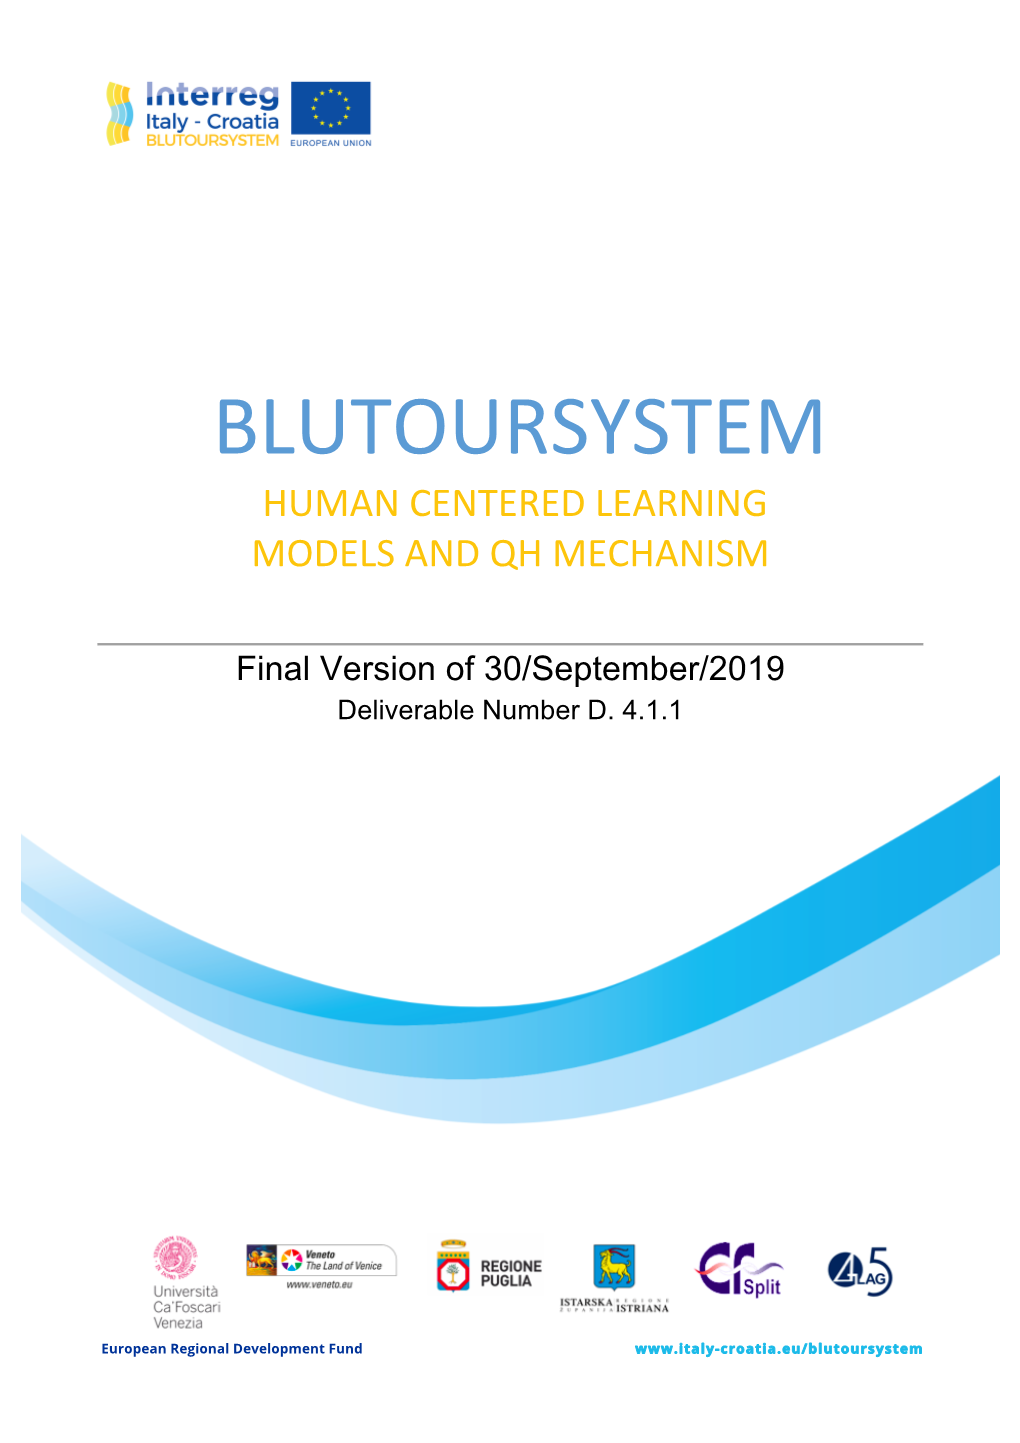 Blutoursystem Human Centered Learning Models and Qh Mechanism